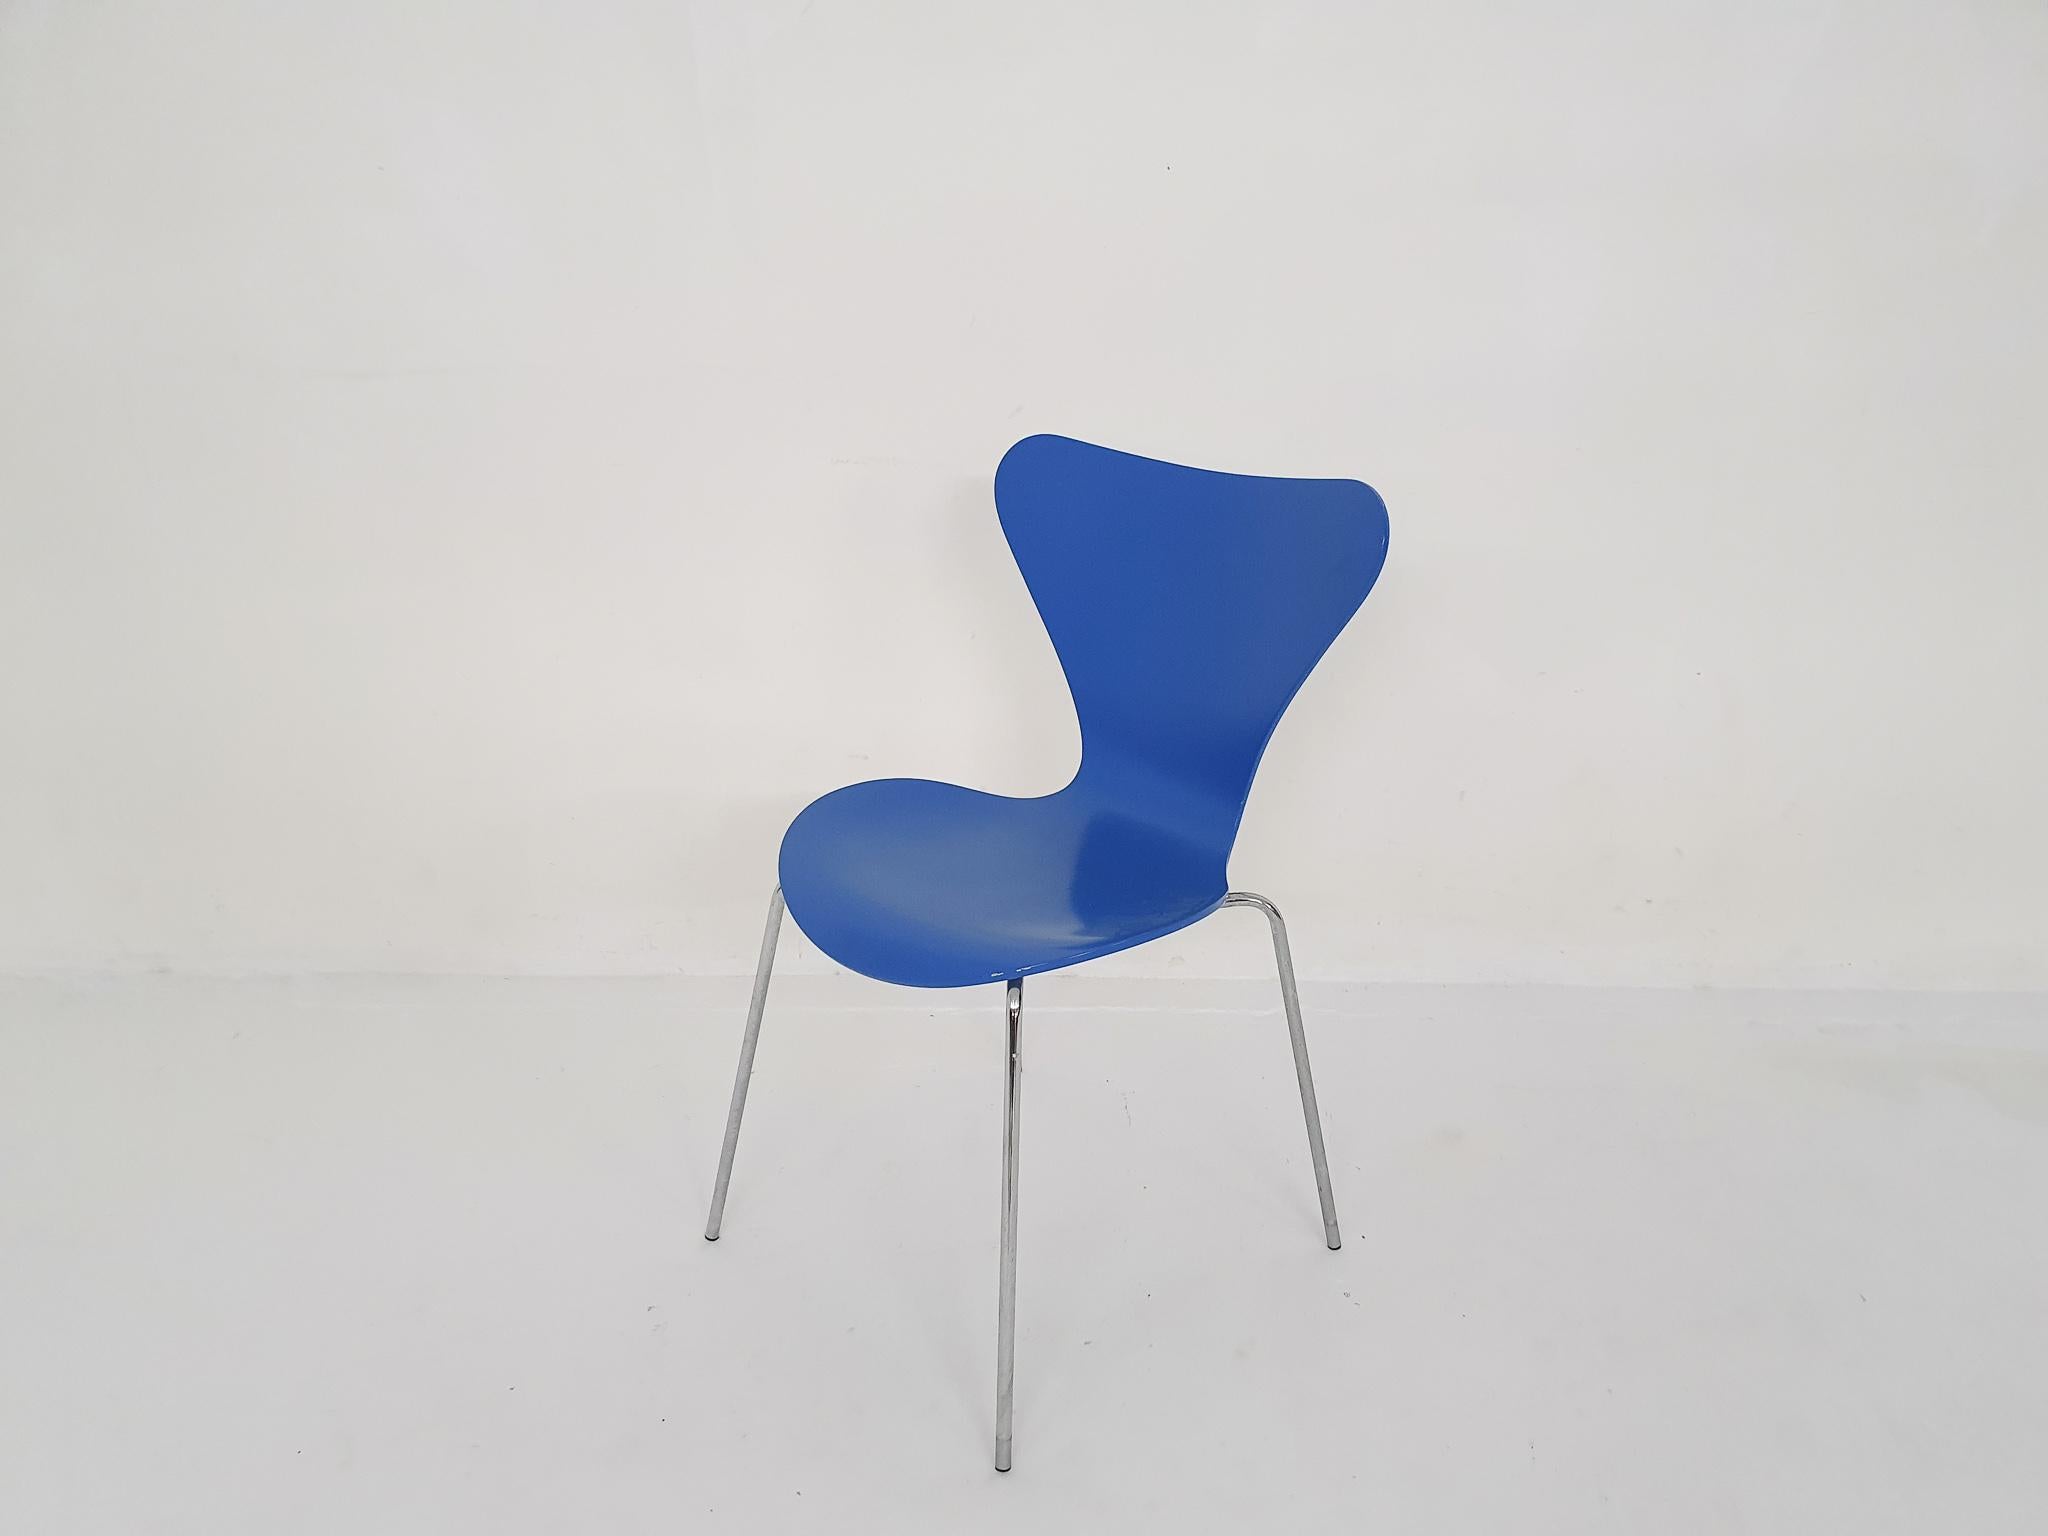 Light blue Butterfly dining chair by Arne Jacobsen. The plastic cap is missing.
Arne Jacobsen was a Danish architect and designer. He is remembered for his contribution to architectural Functionalism. He was succesfull with his simple but effective